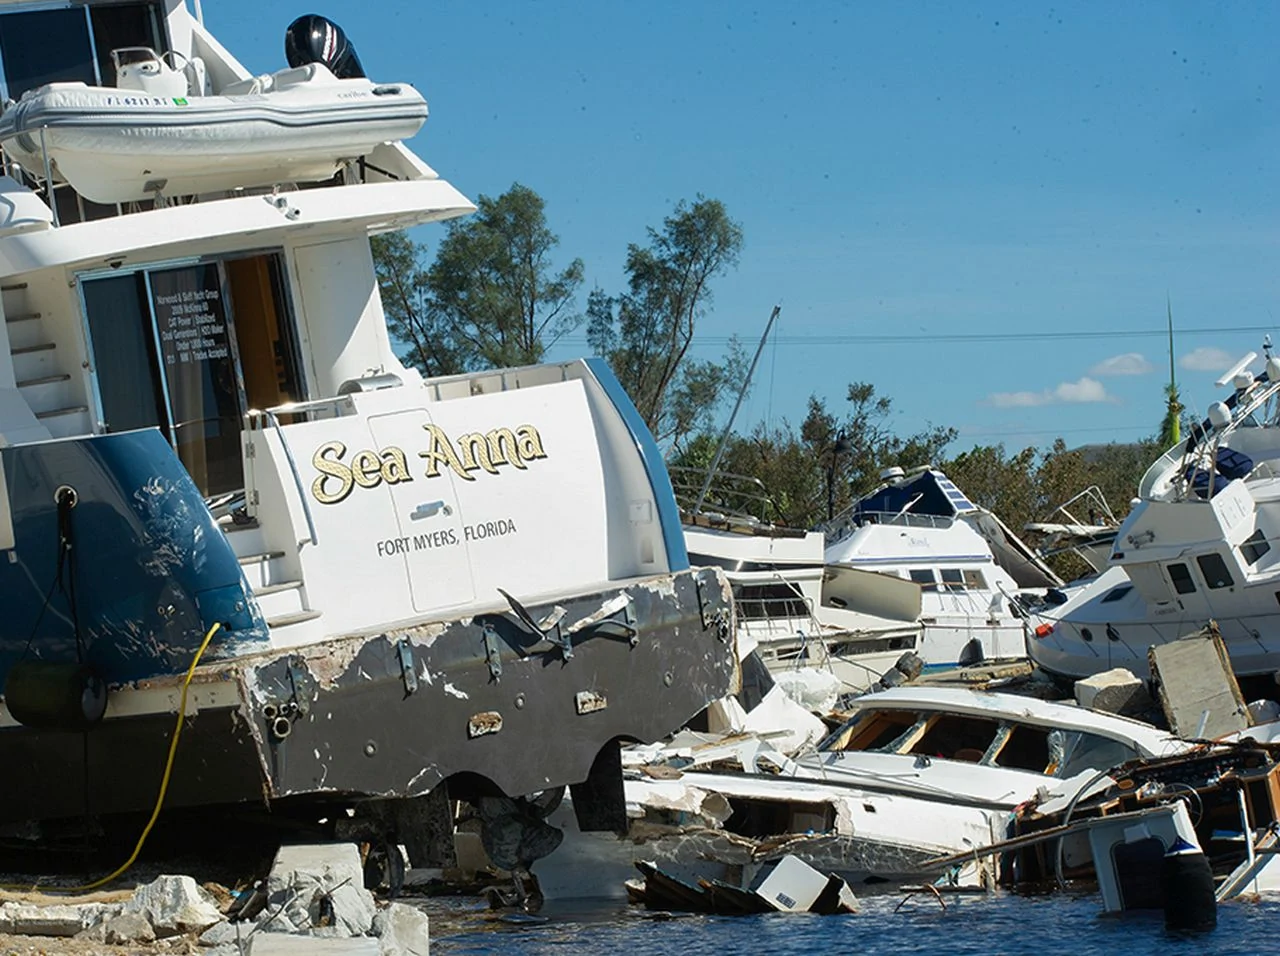 Several boats severely damaged at Fort Myers, Florida waterfront with the Sea Anna boat in the foreground.oats piled in